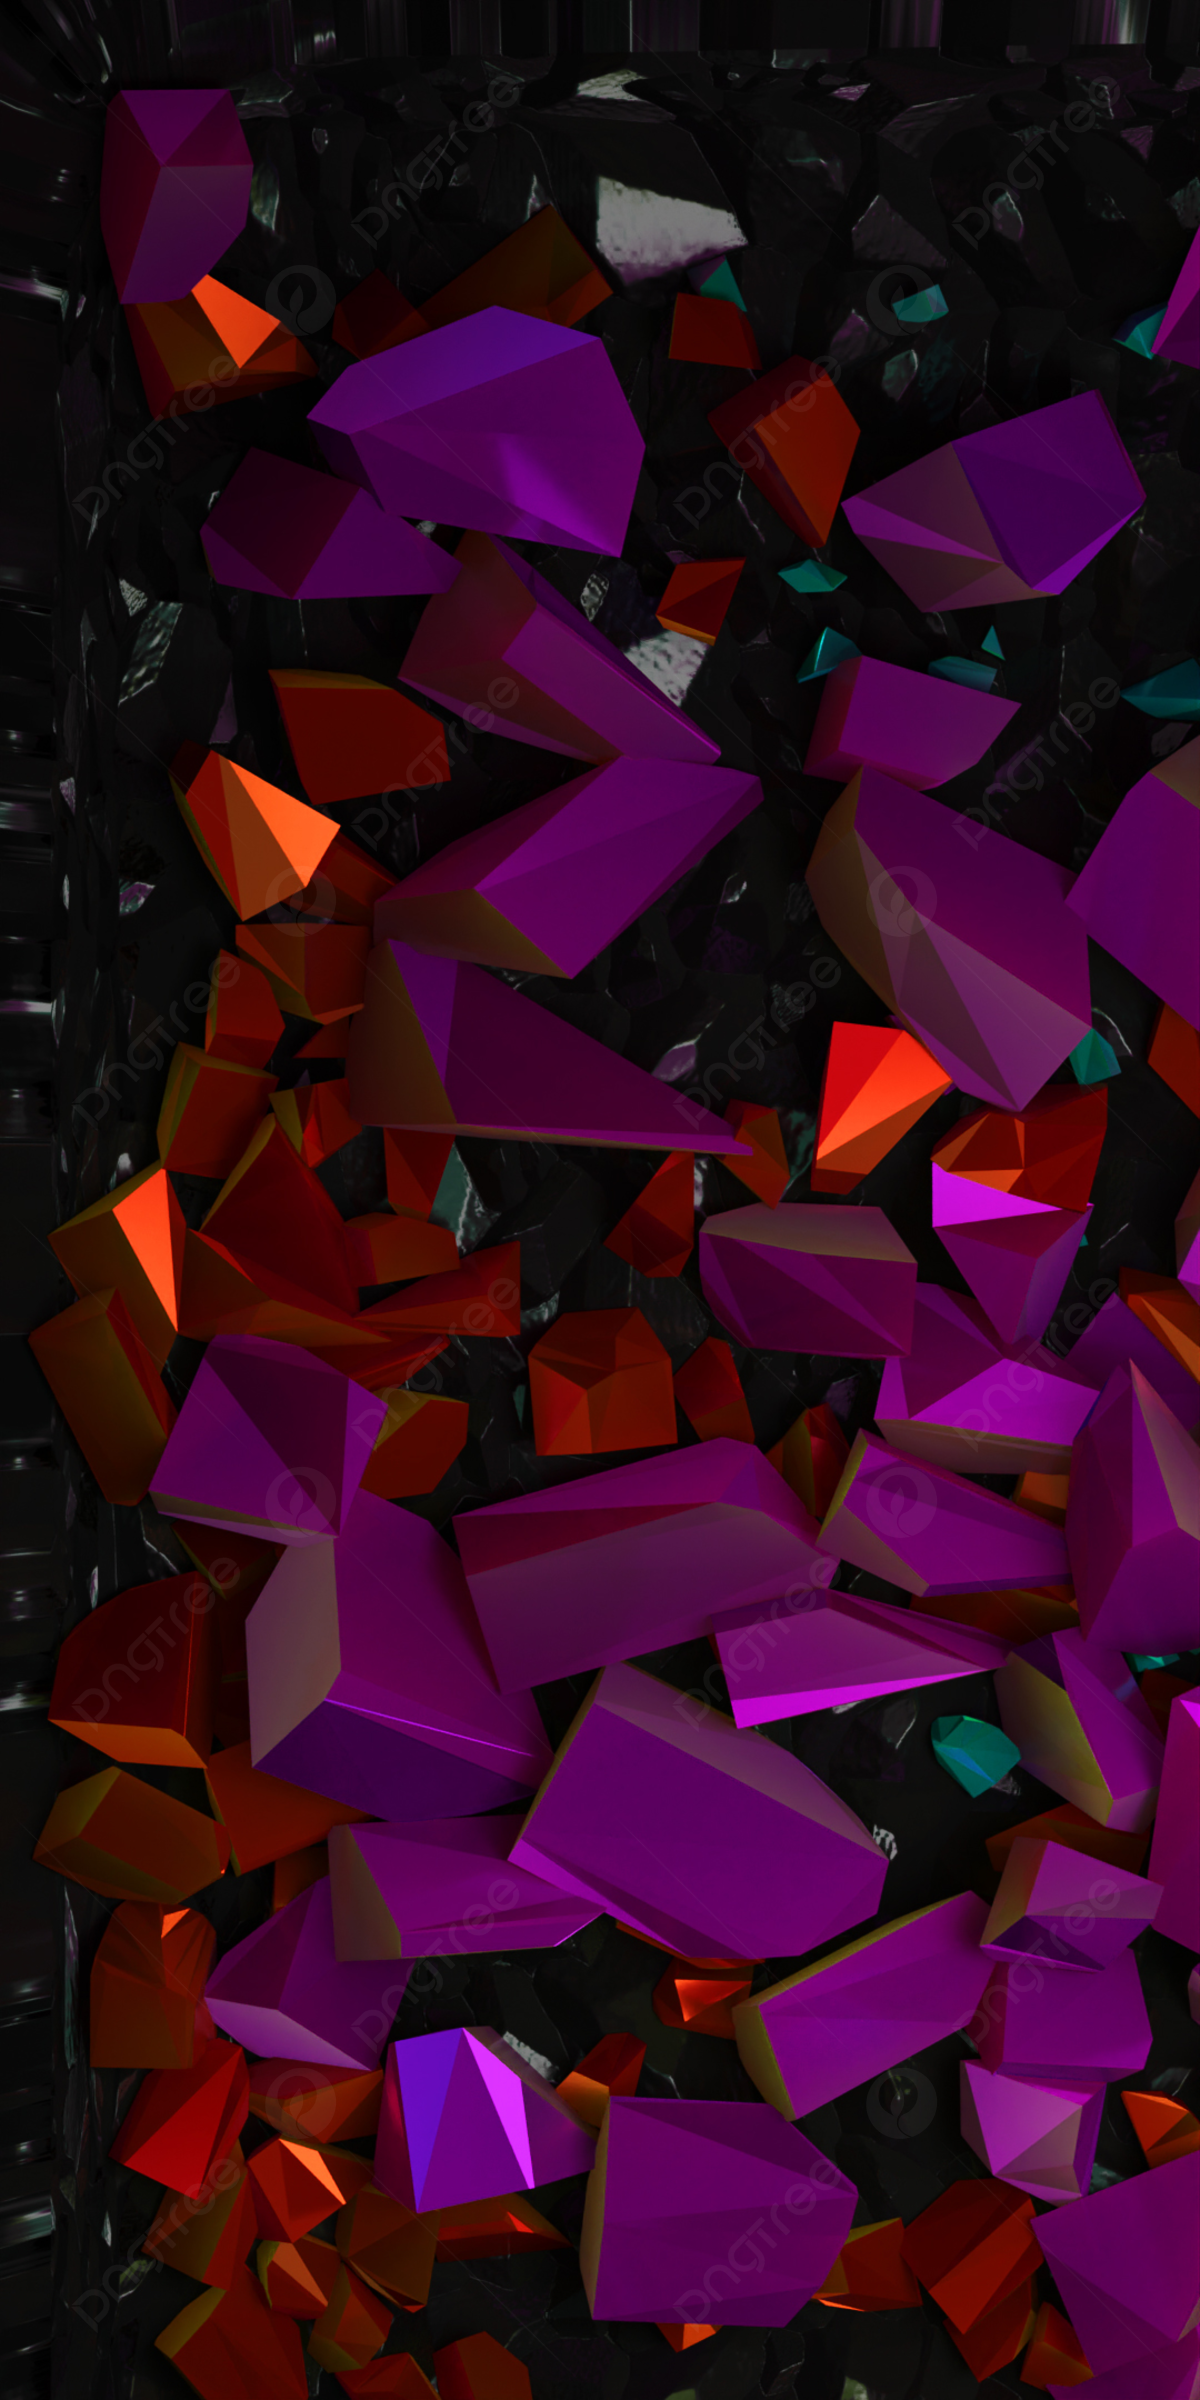 Crystal background wallpaper purple red chunk of gem shiny triangle d luxury background image for free download